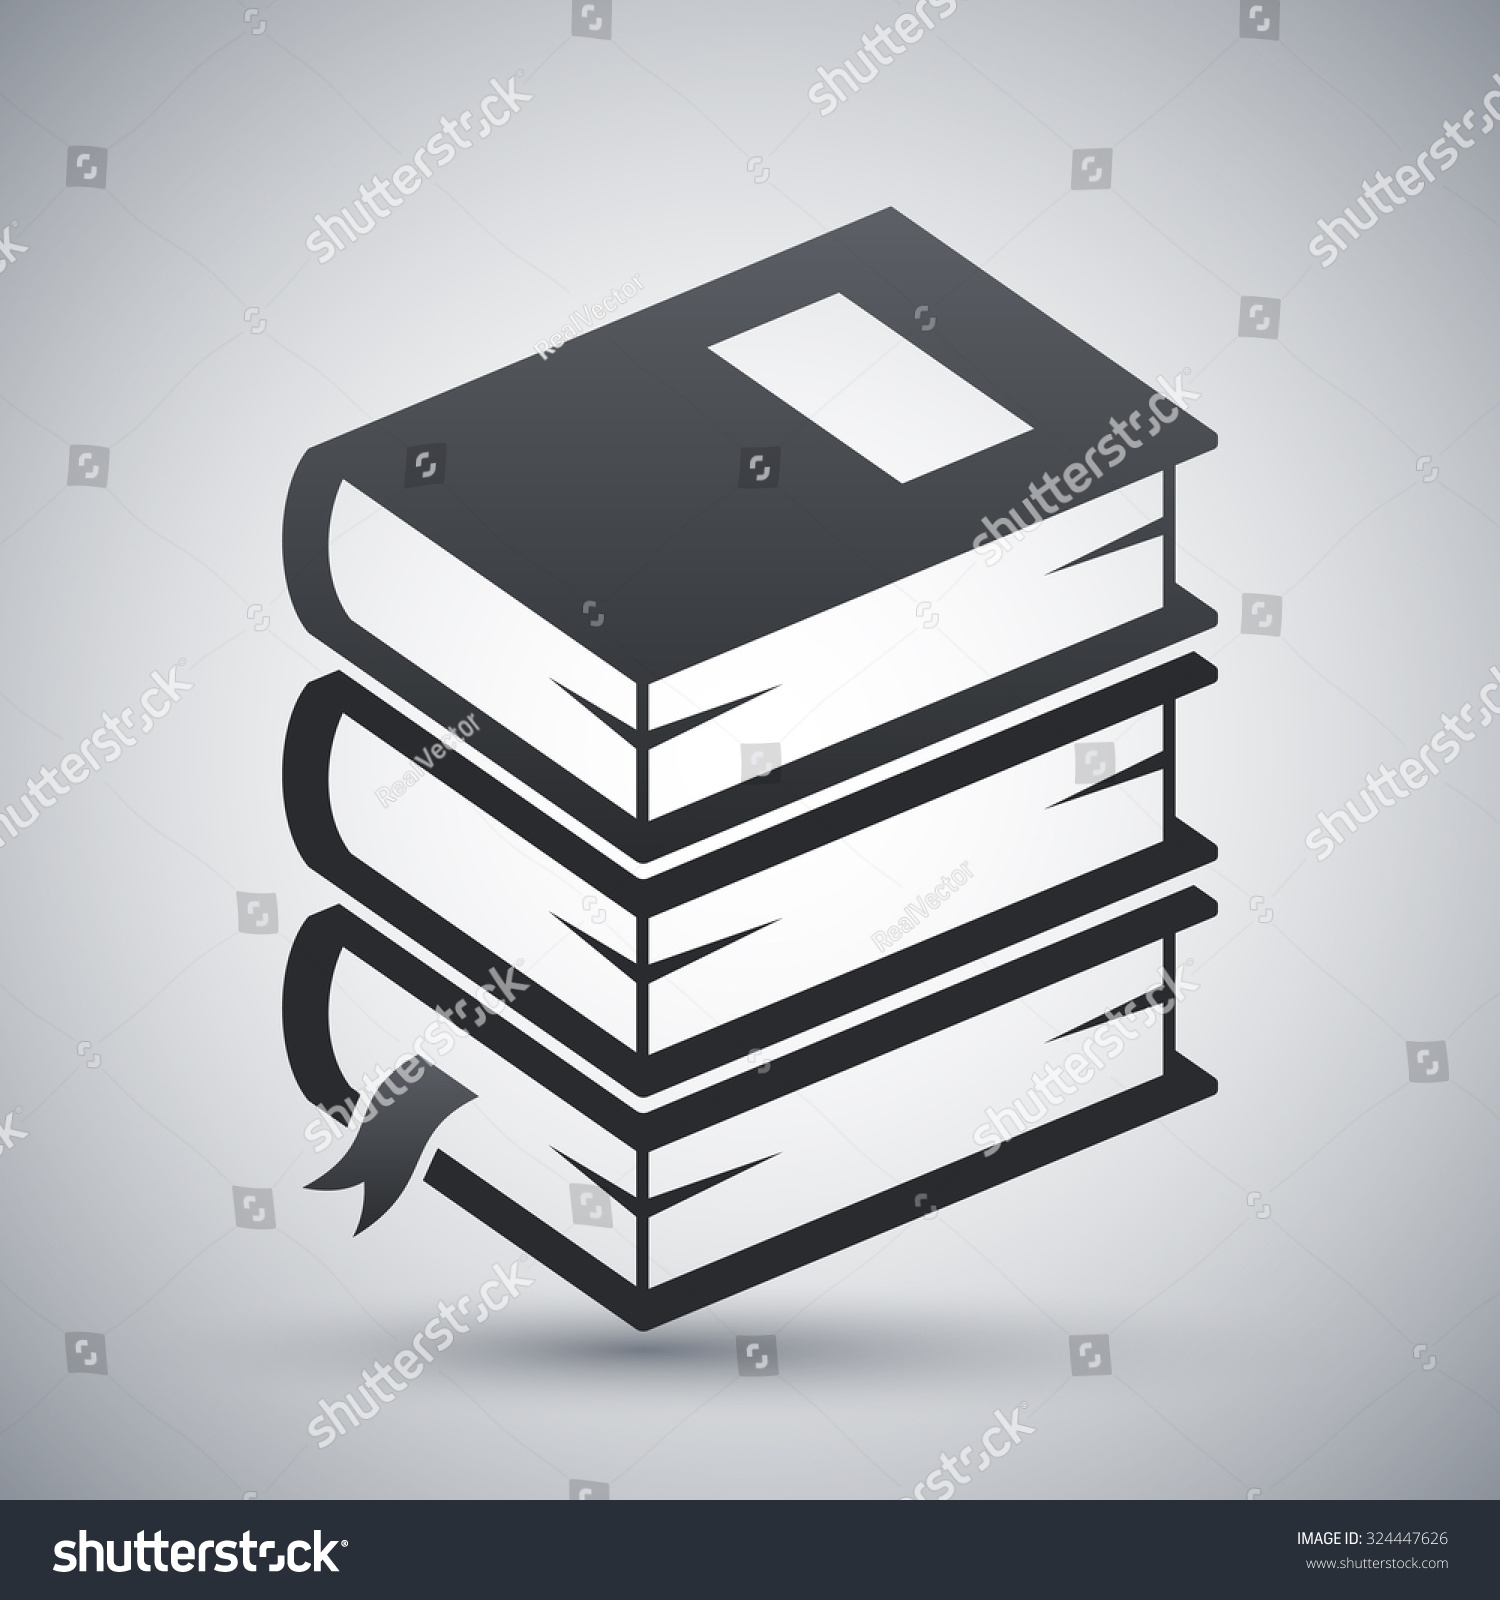 Vector Stack Of Books Icon - 324447626 : Shutterstock